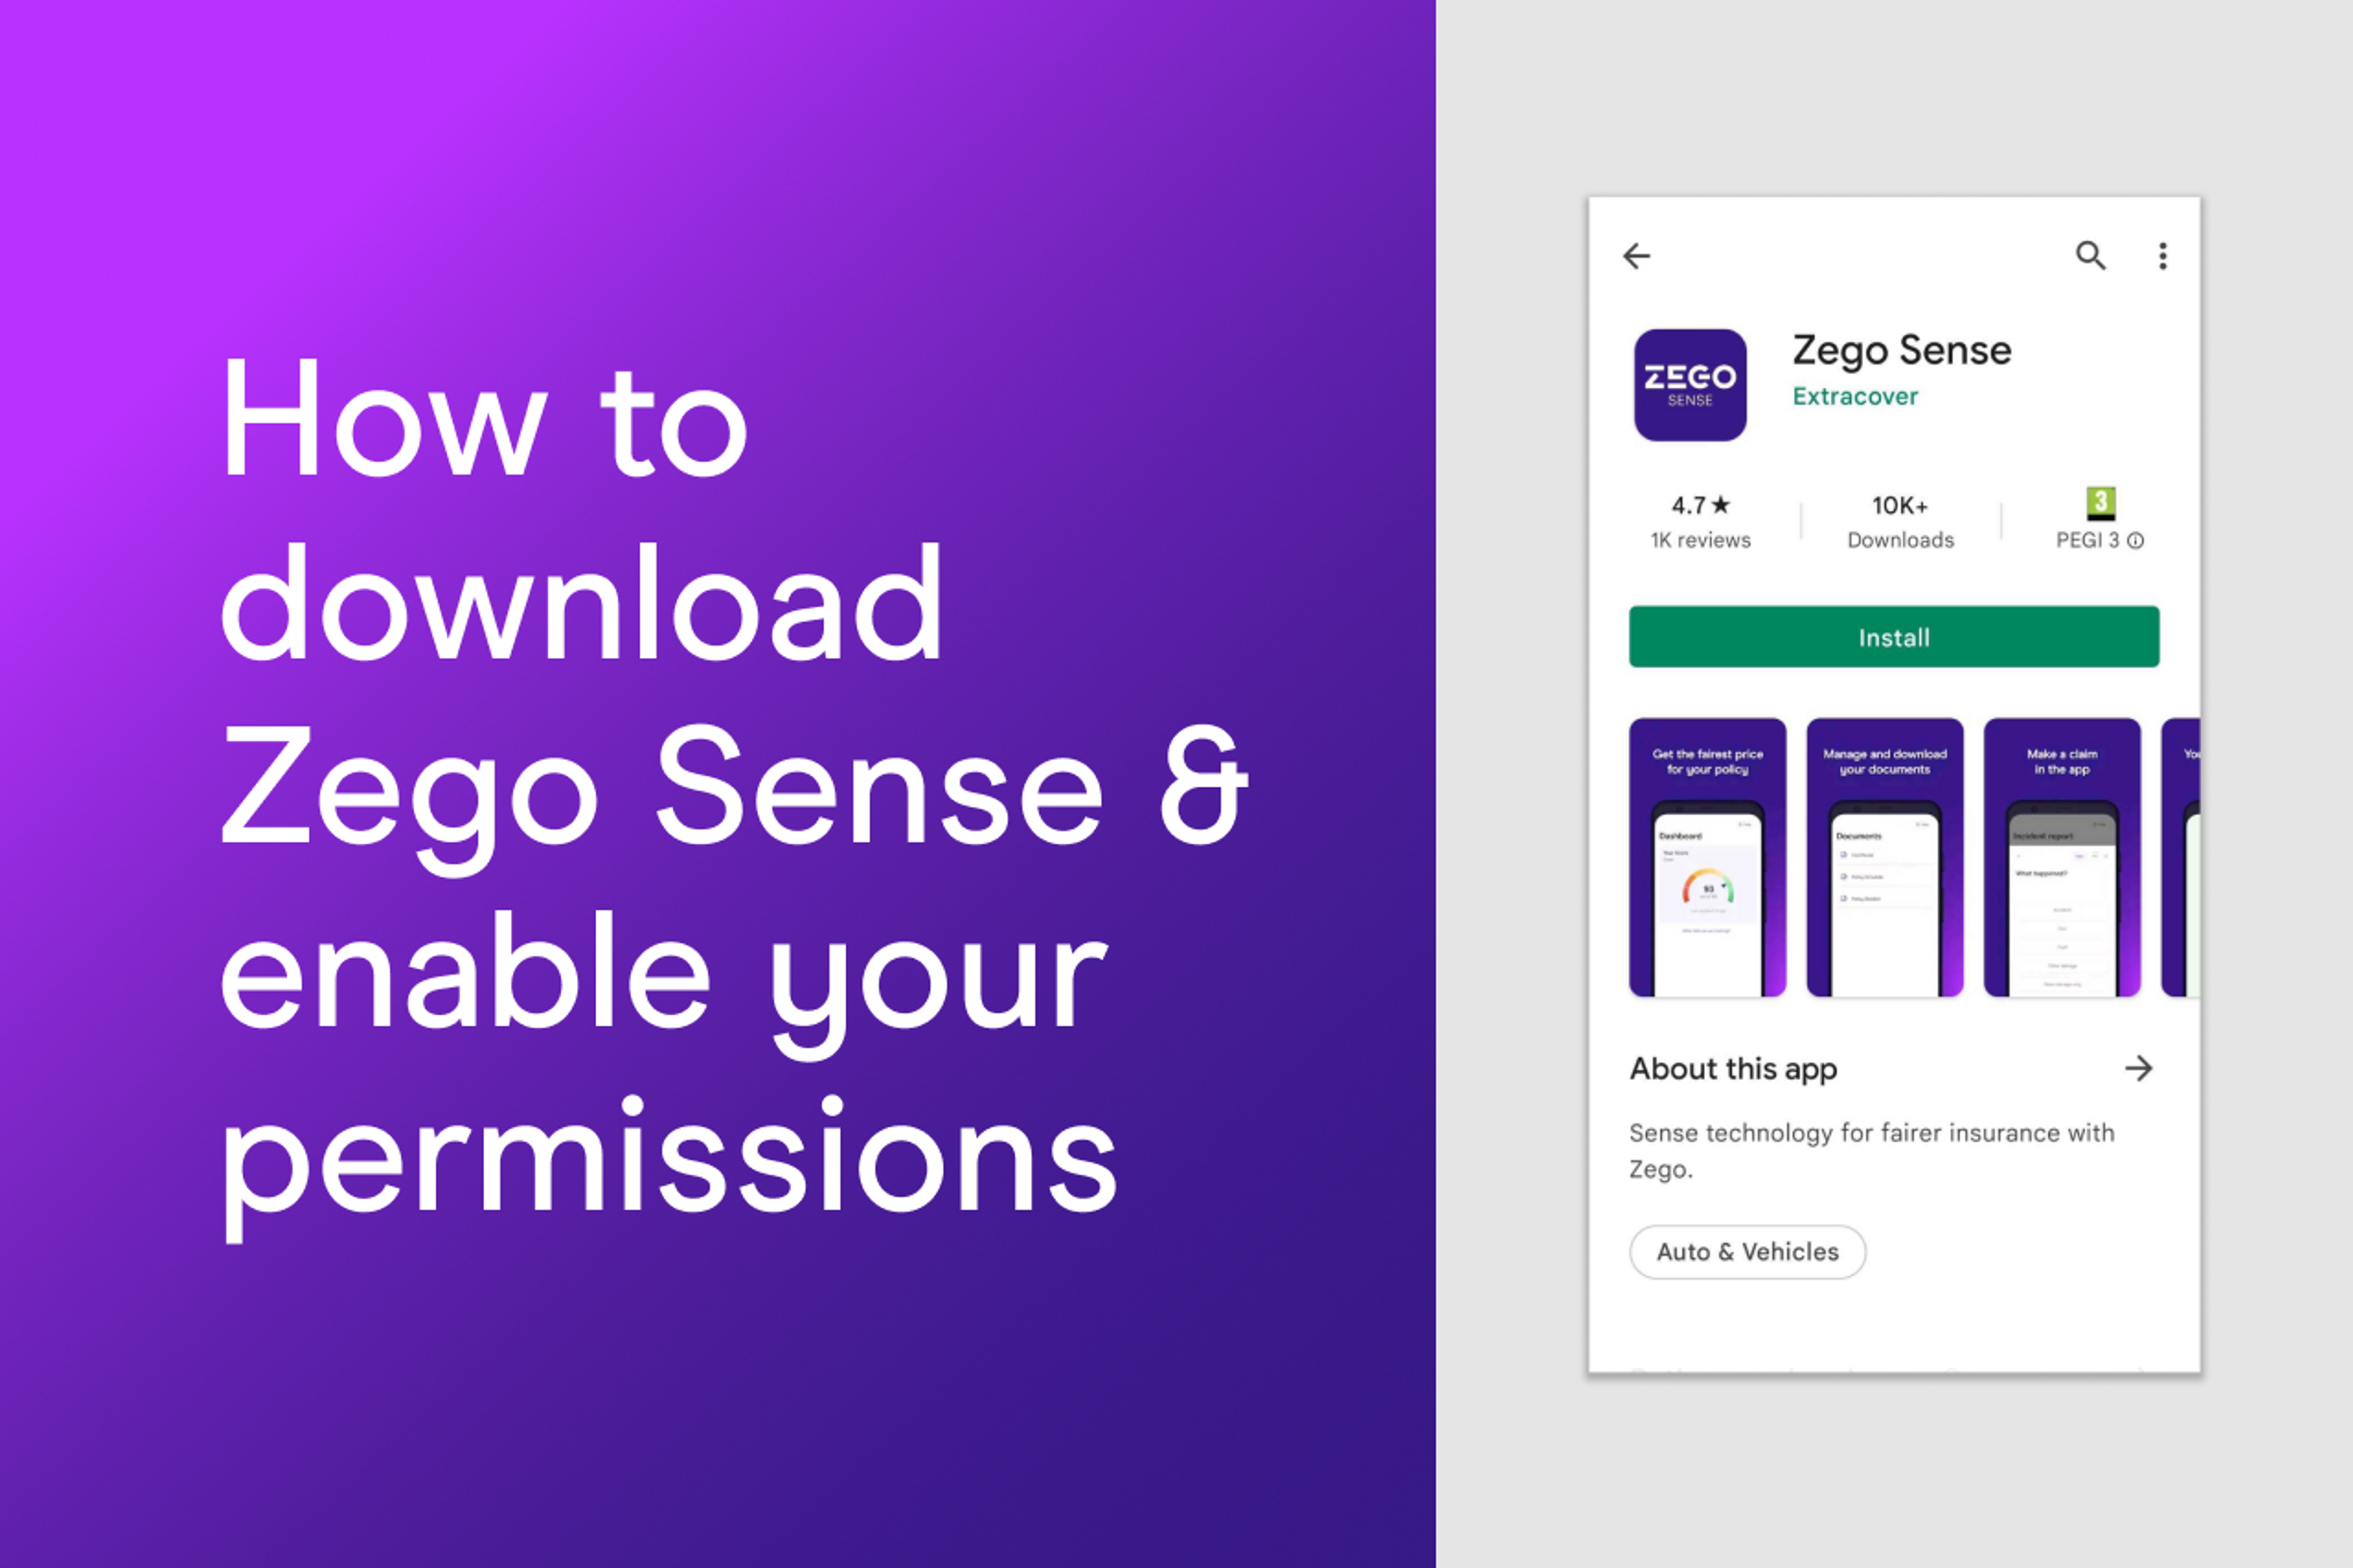 How to download Zego Sense & enable your permissions